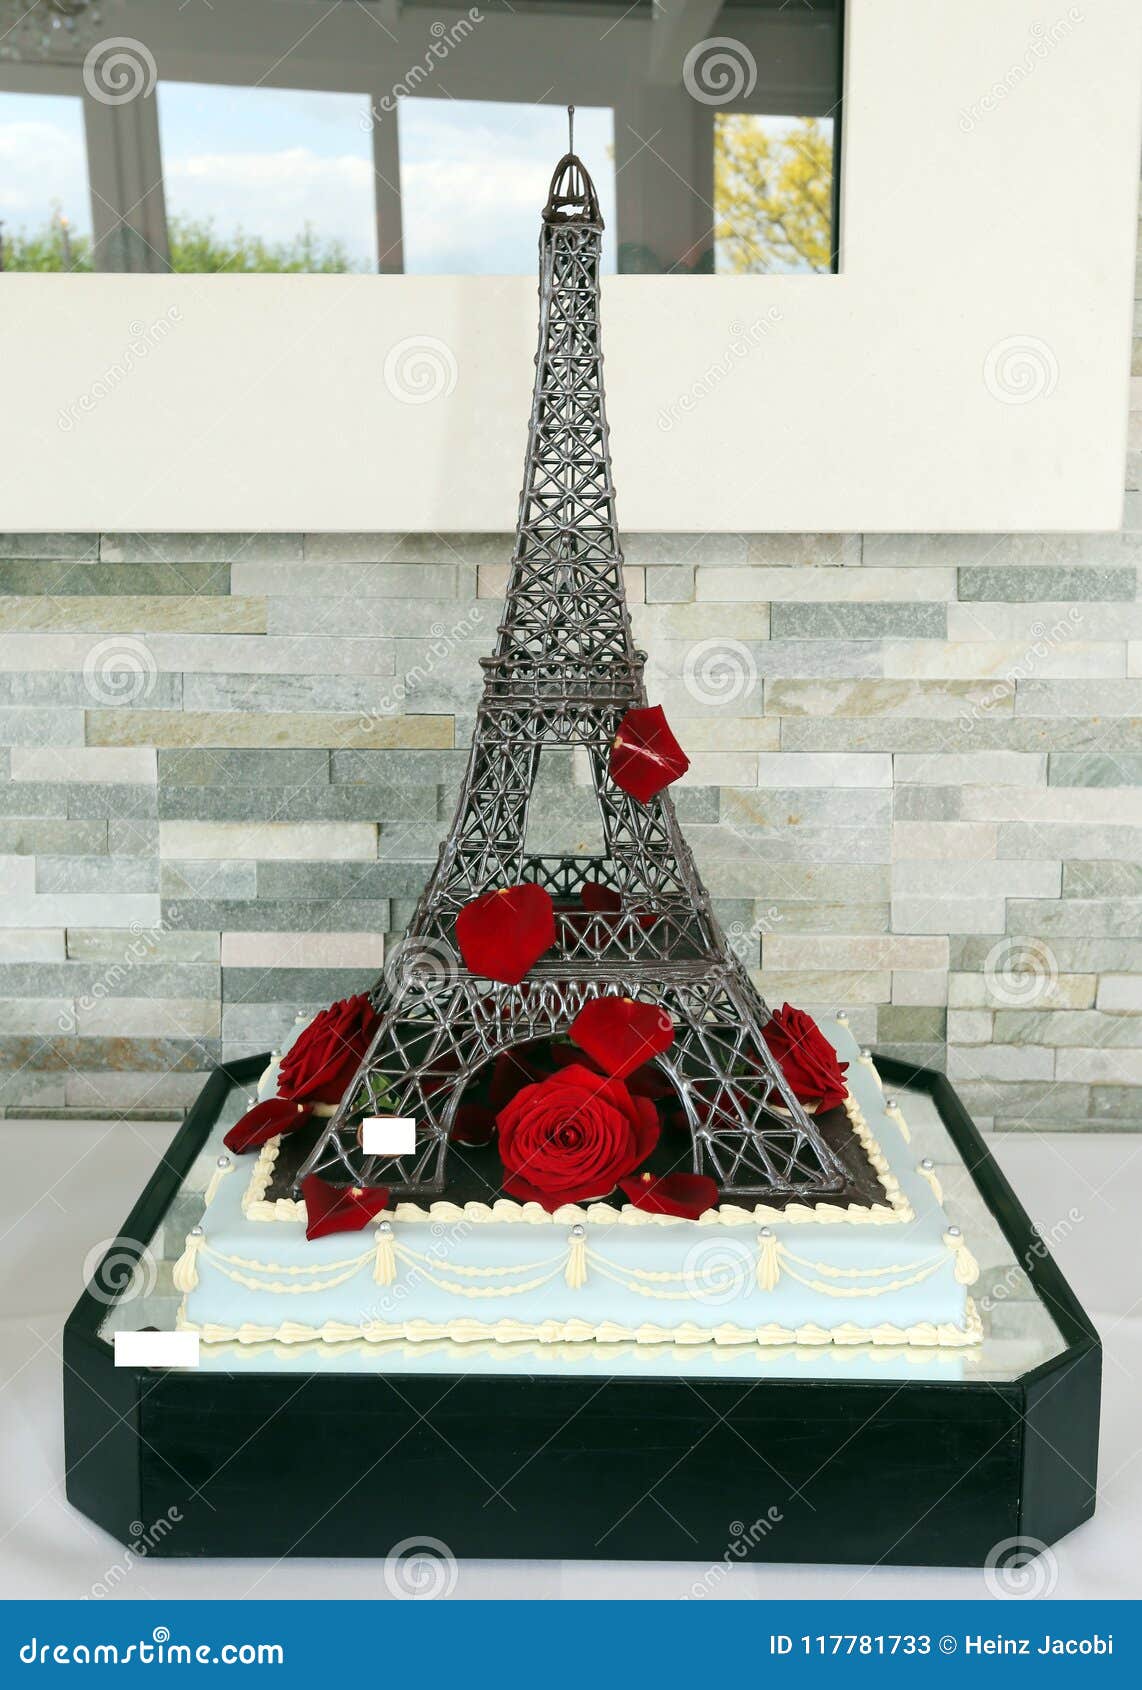 wedding cake as eiffel tower with red roses